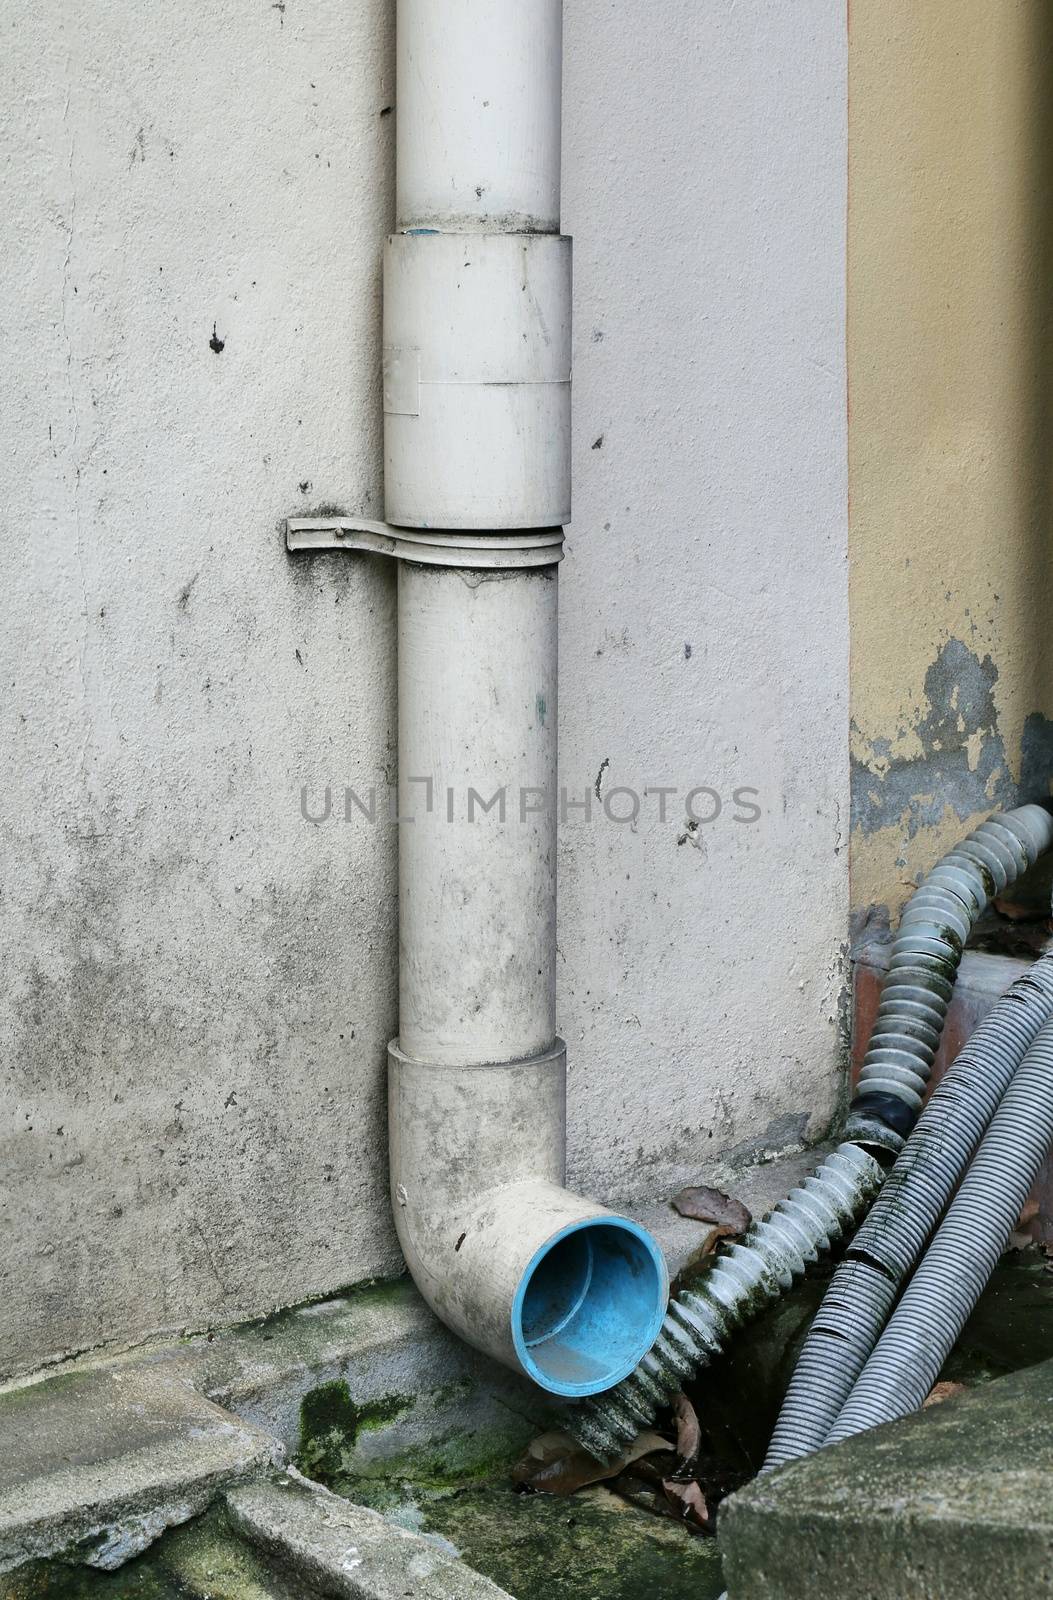 Water pipes, Pipe waste water